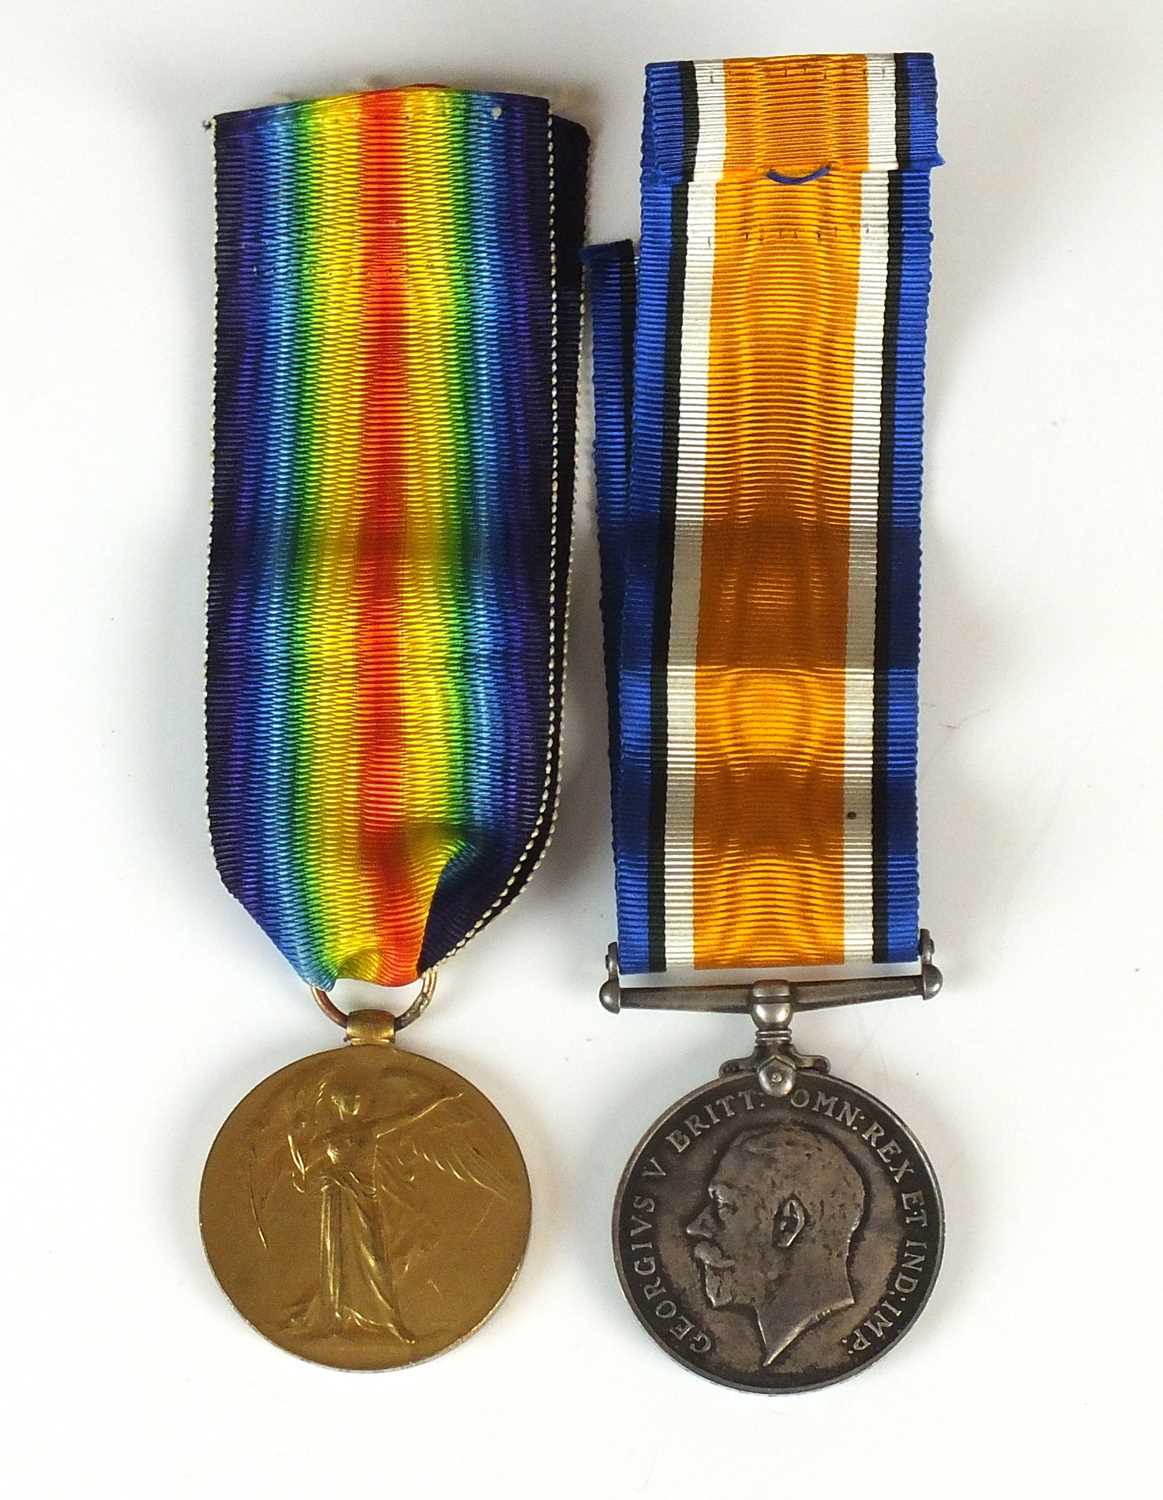 Lot 29 - First World War pair of medals awarded to Surgeon Lieutenant McCord, Royal Navy